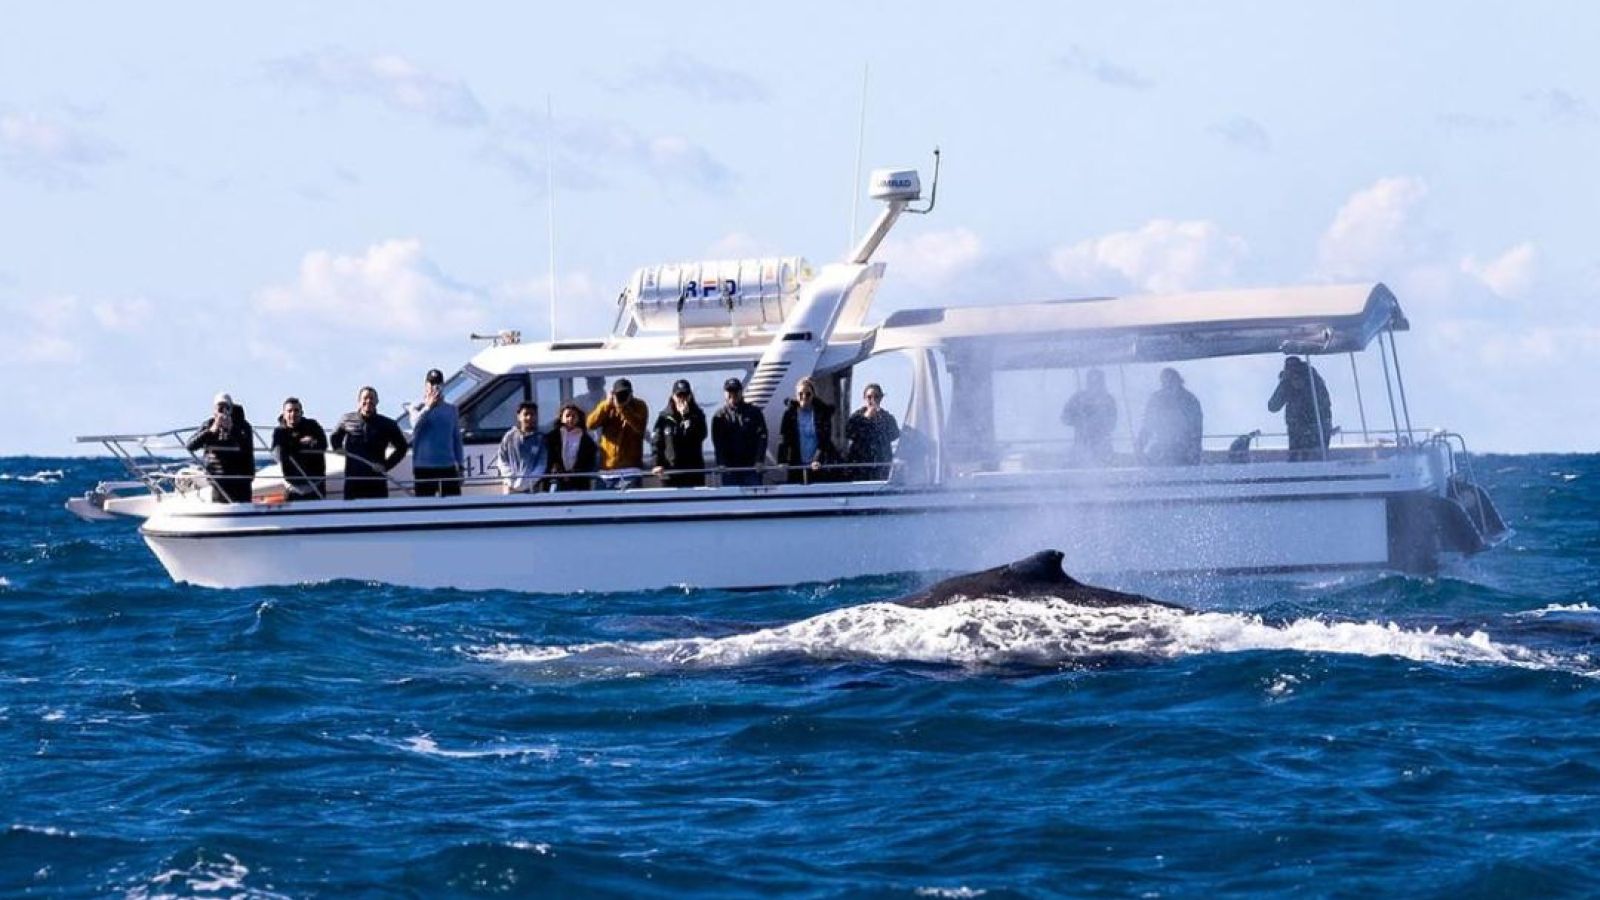 Sydney whale watching tours